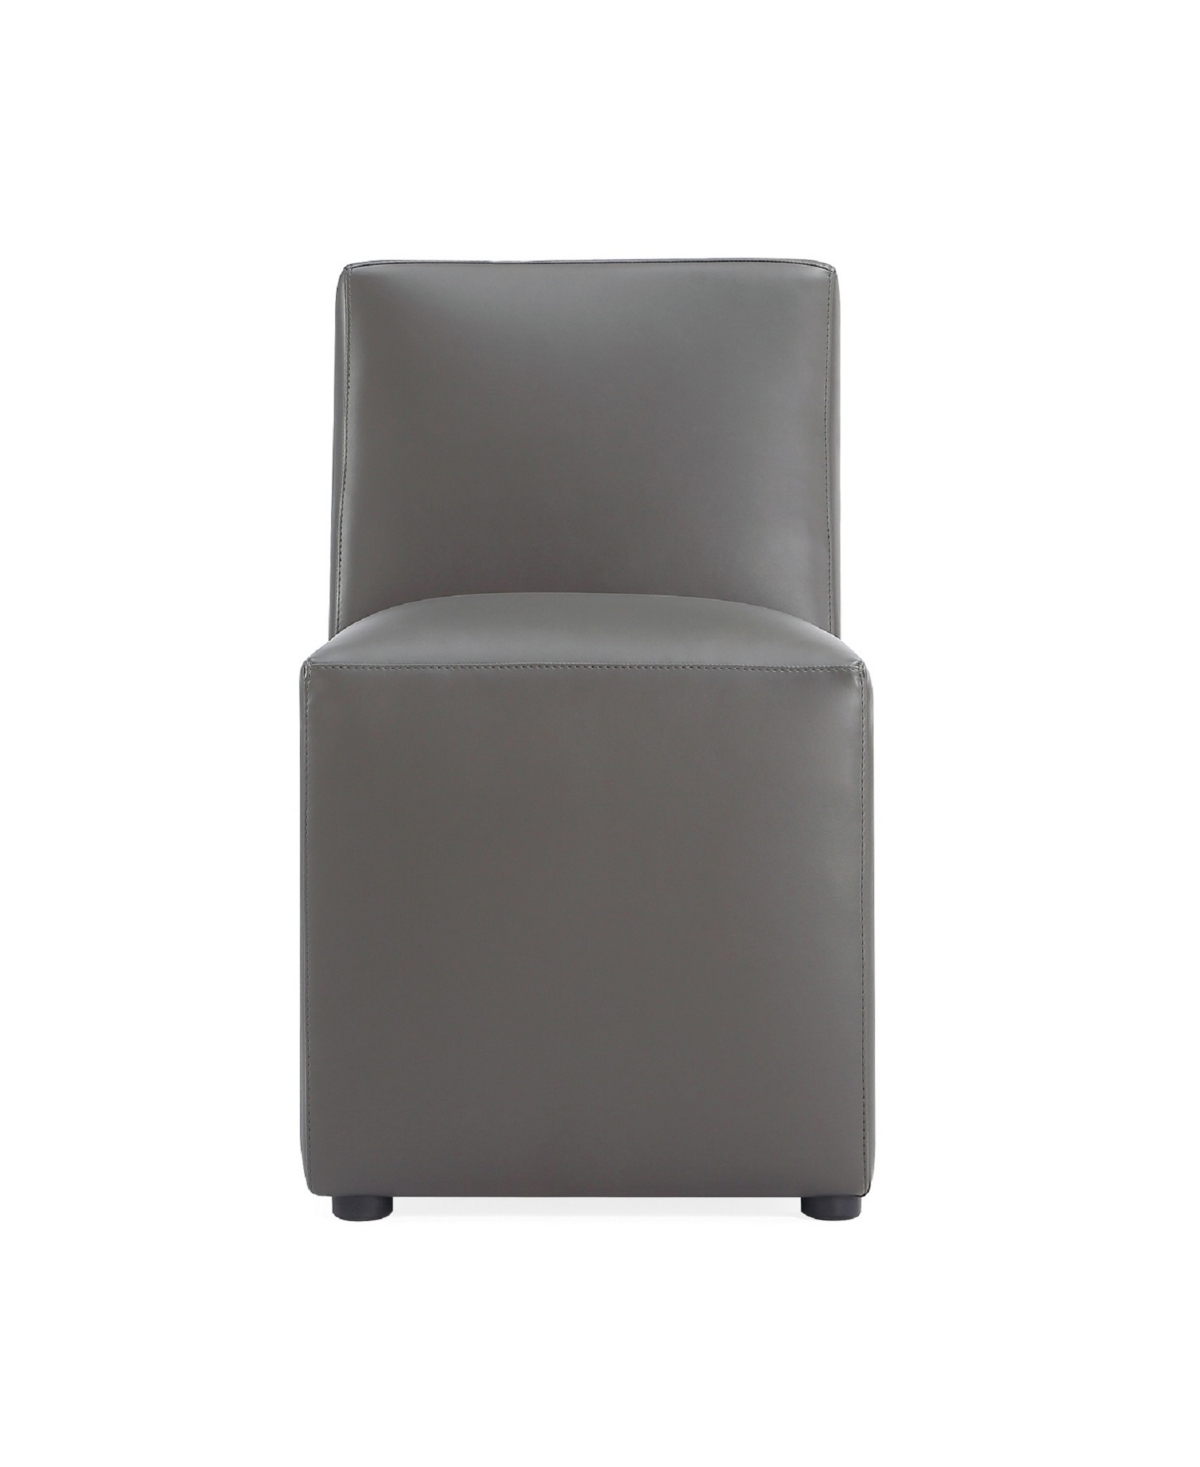 Manhattan Comfort Anna 18.9" L Faux Leather Upholstered Square Dining Chair In Pewter